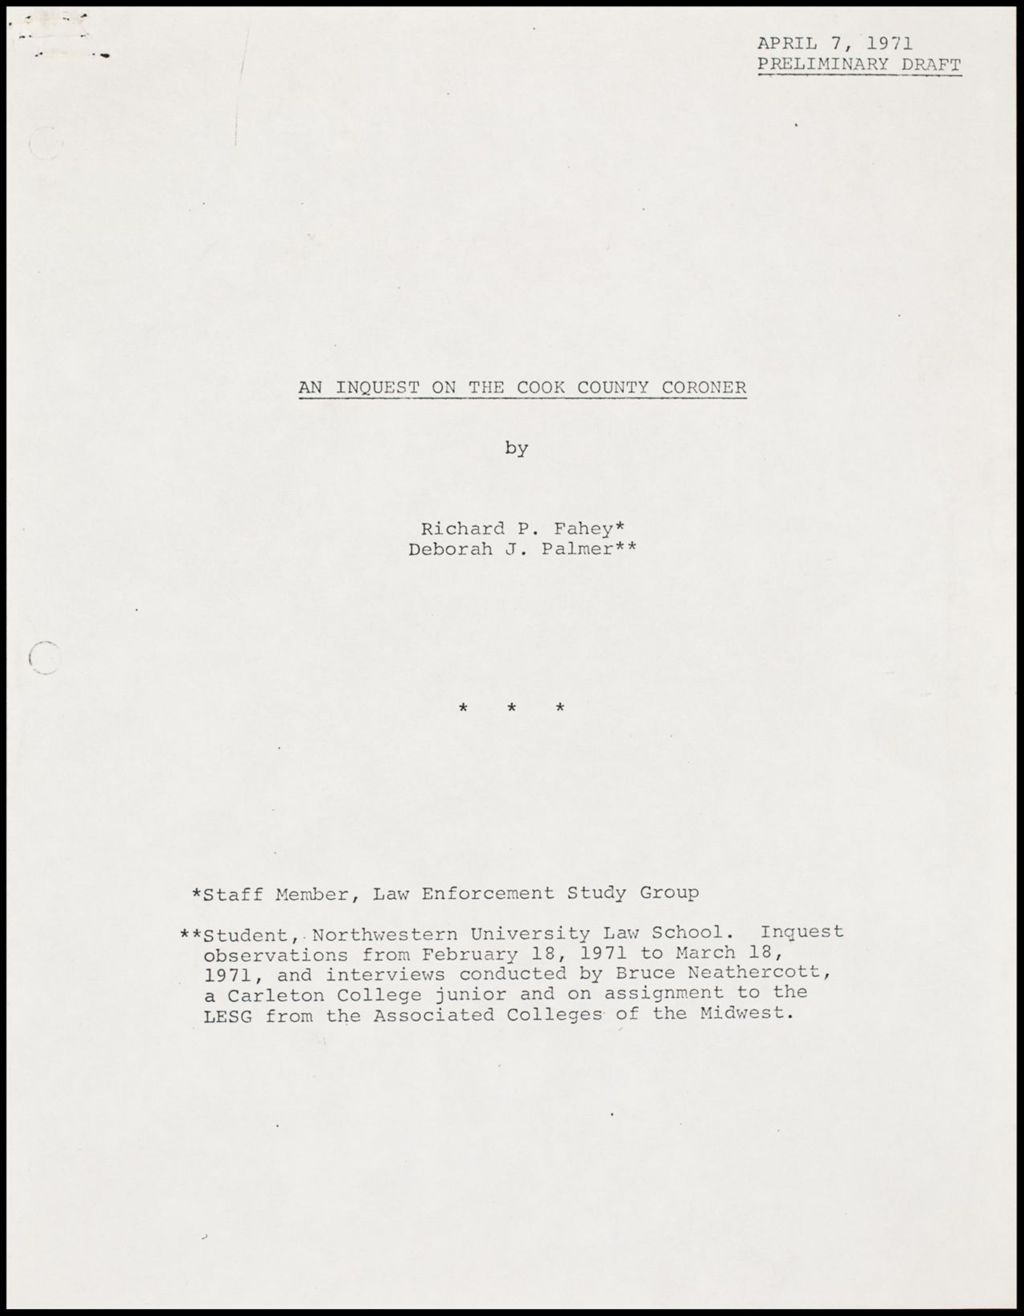 Miniature of An Inquest on the Cook County Corner, 1971 (Folder III-1885)